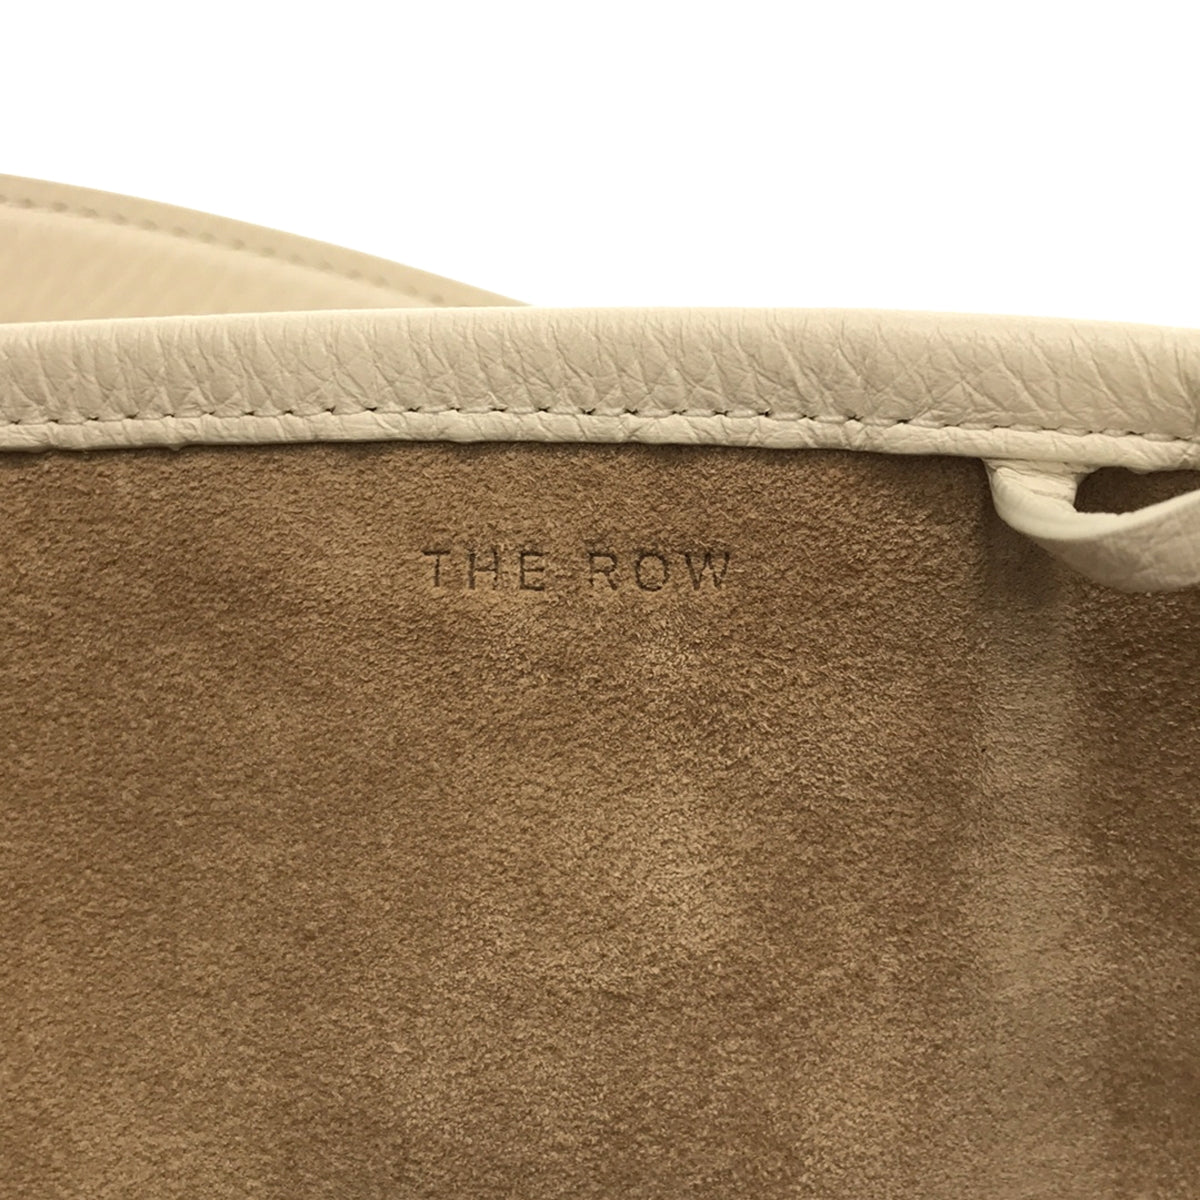 THE ROW / ザロウ | N/S Park Tote バッグ | – KLD